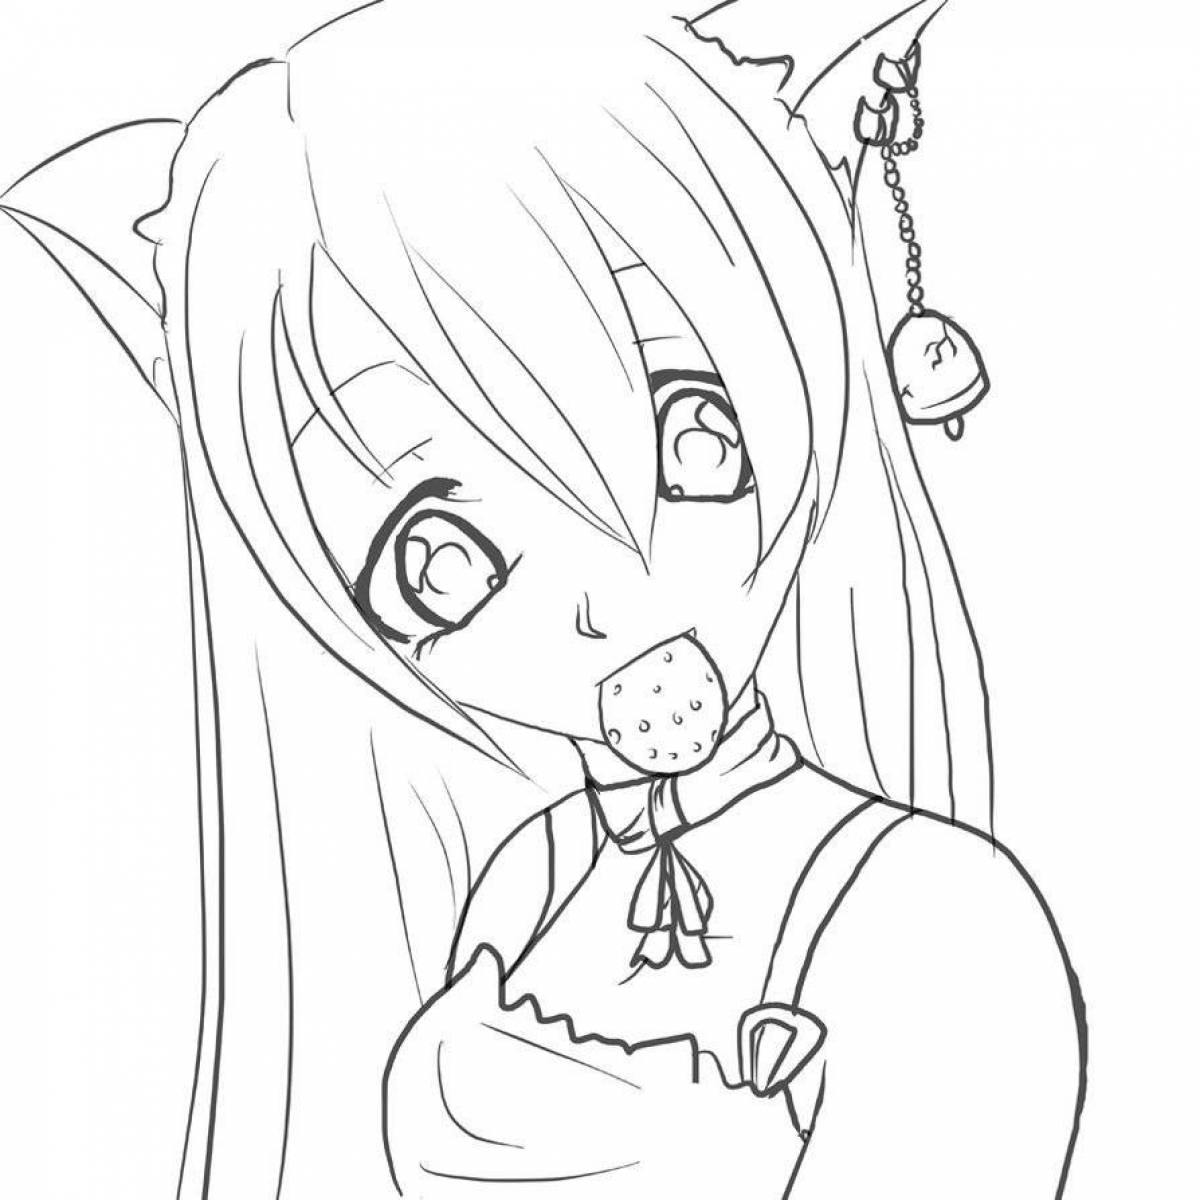 Awesome anime chan coloring page